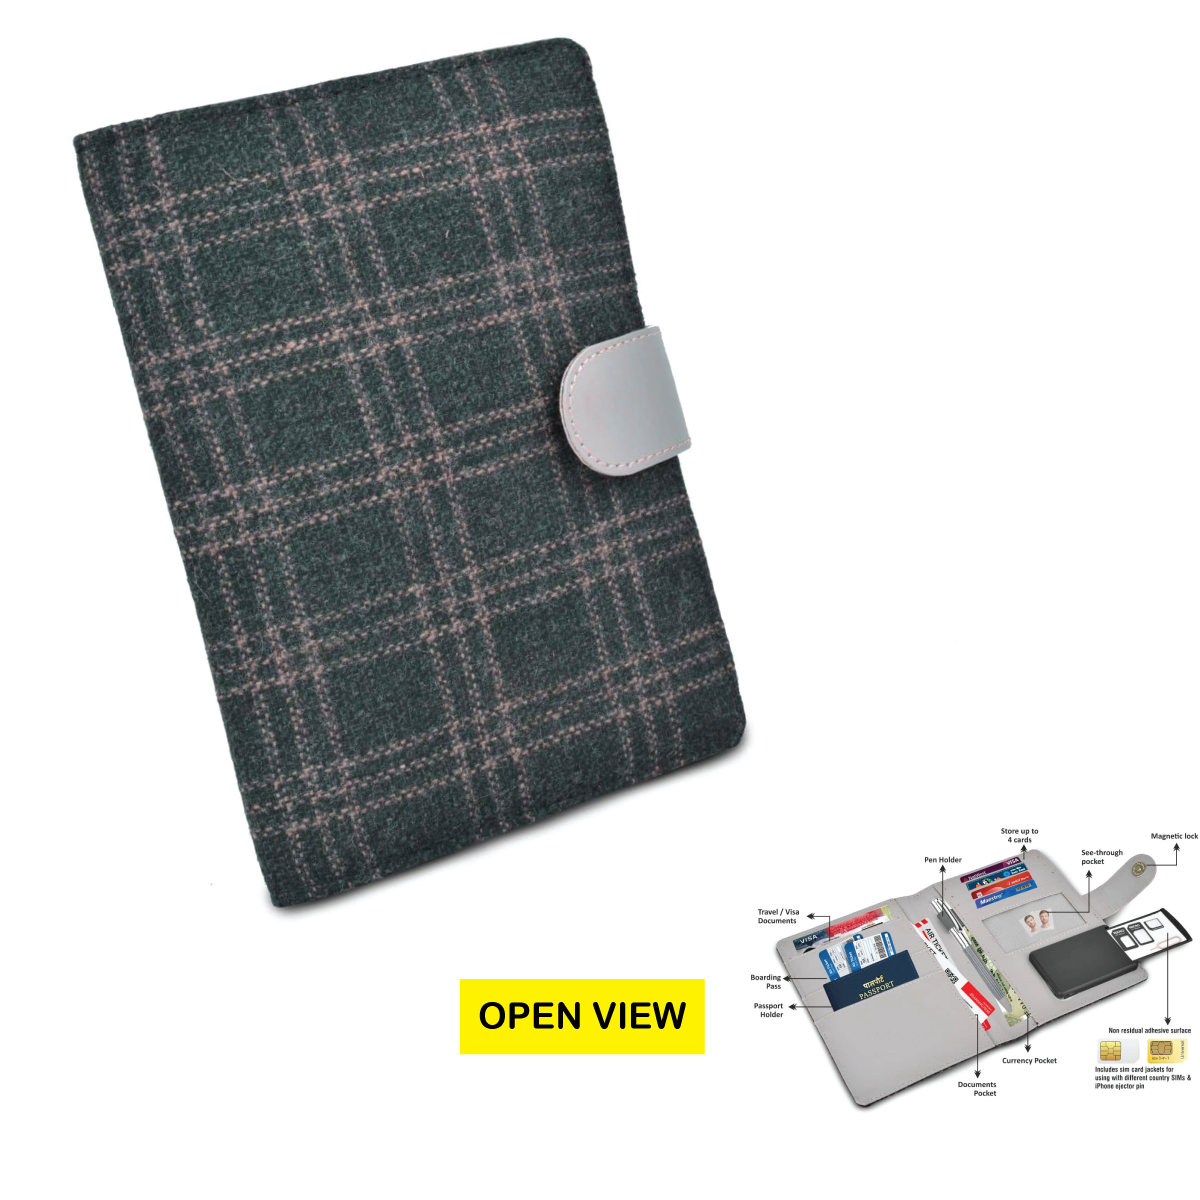 Premium Passport Holder Soft Tweed Material - Gifts for Travelers, Travel Companies, Personal or Corporate Gifting BGS34